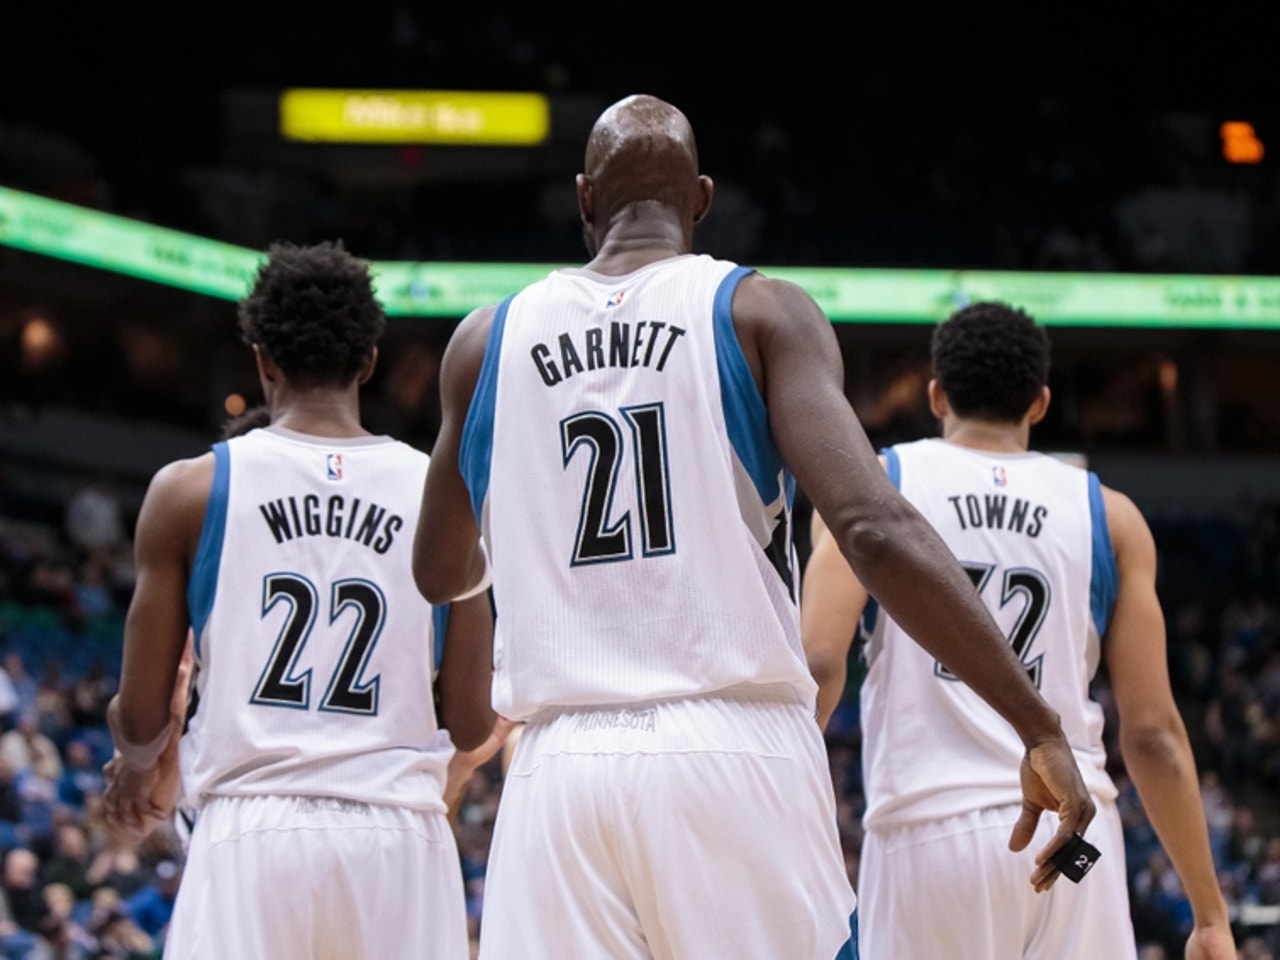 Kevin Garnett Talks Missed Opportunities, On and Off the Court